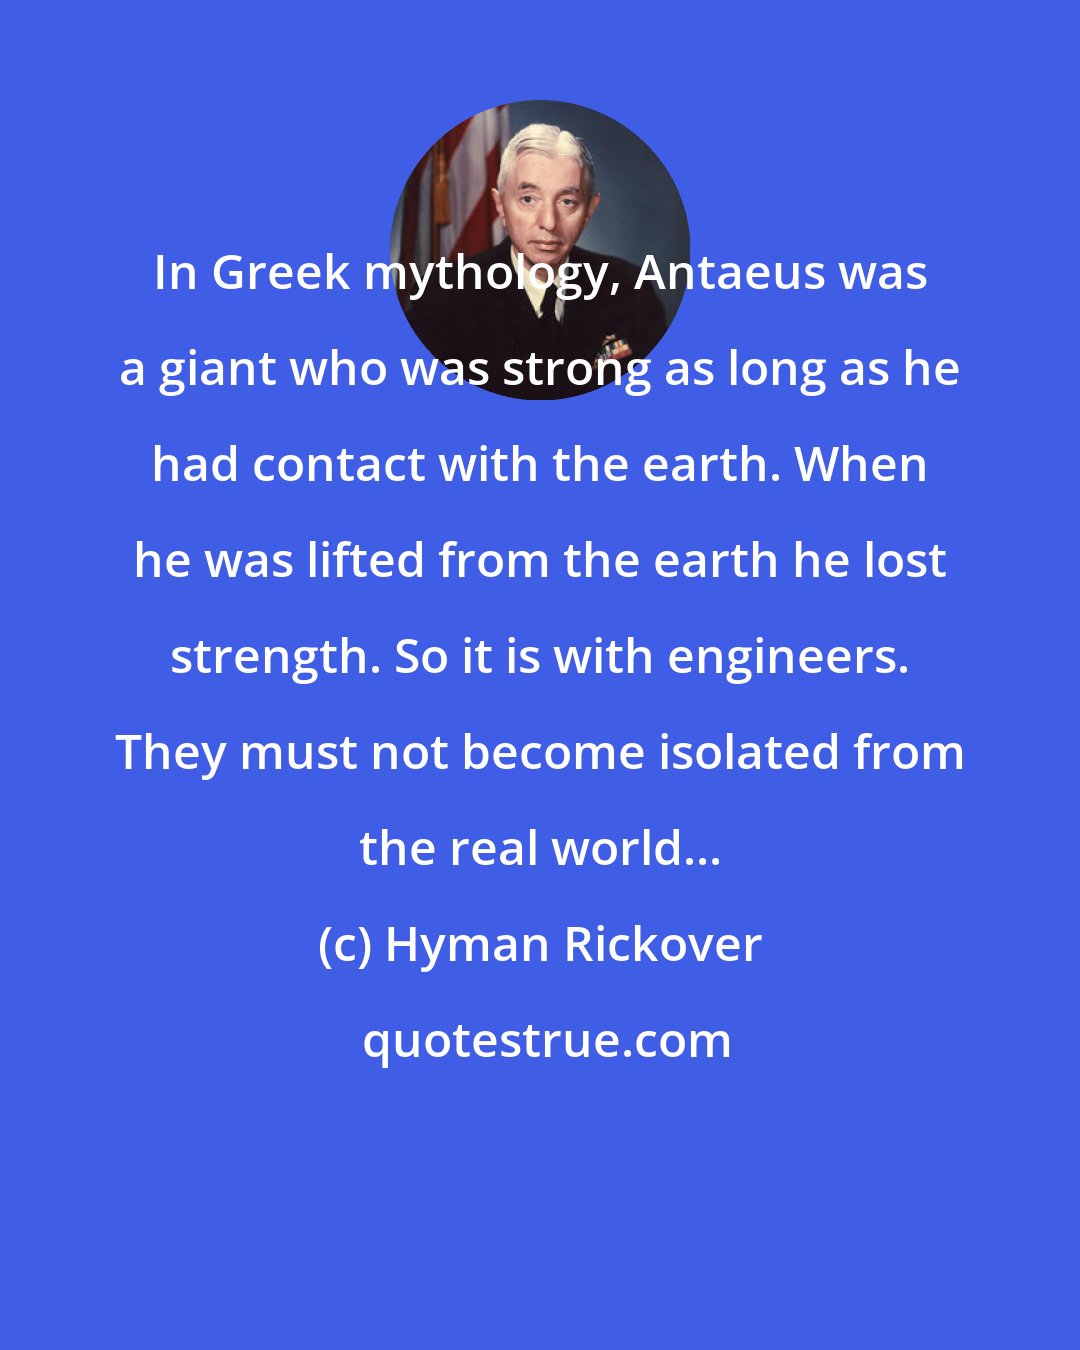 Hyman Rickover: In Greek mythology, Antaeus was a giant who was strong as long as he had contact with the earth. When he was lifted from the earth he lost strength. So it is with engineers. They must not become isolated from the real world...